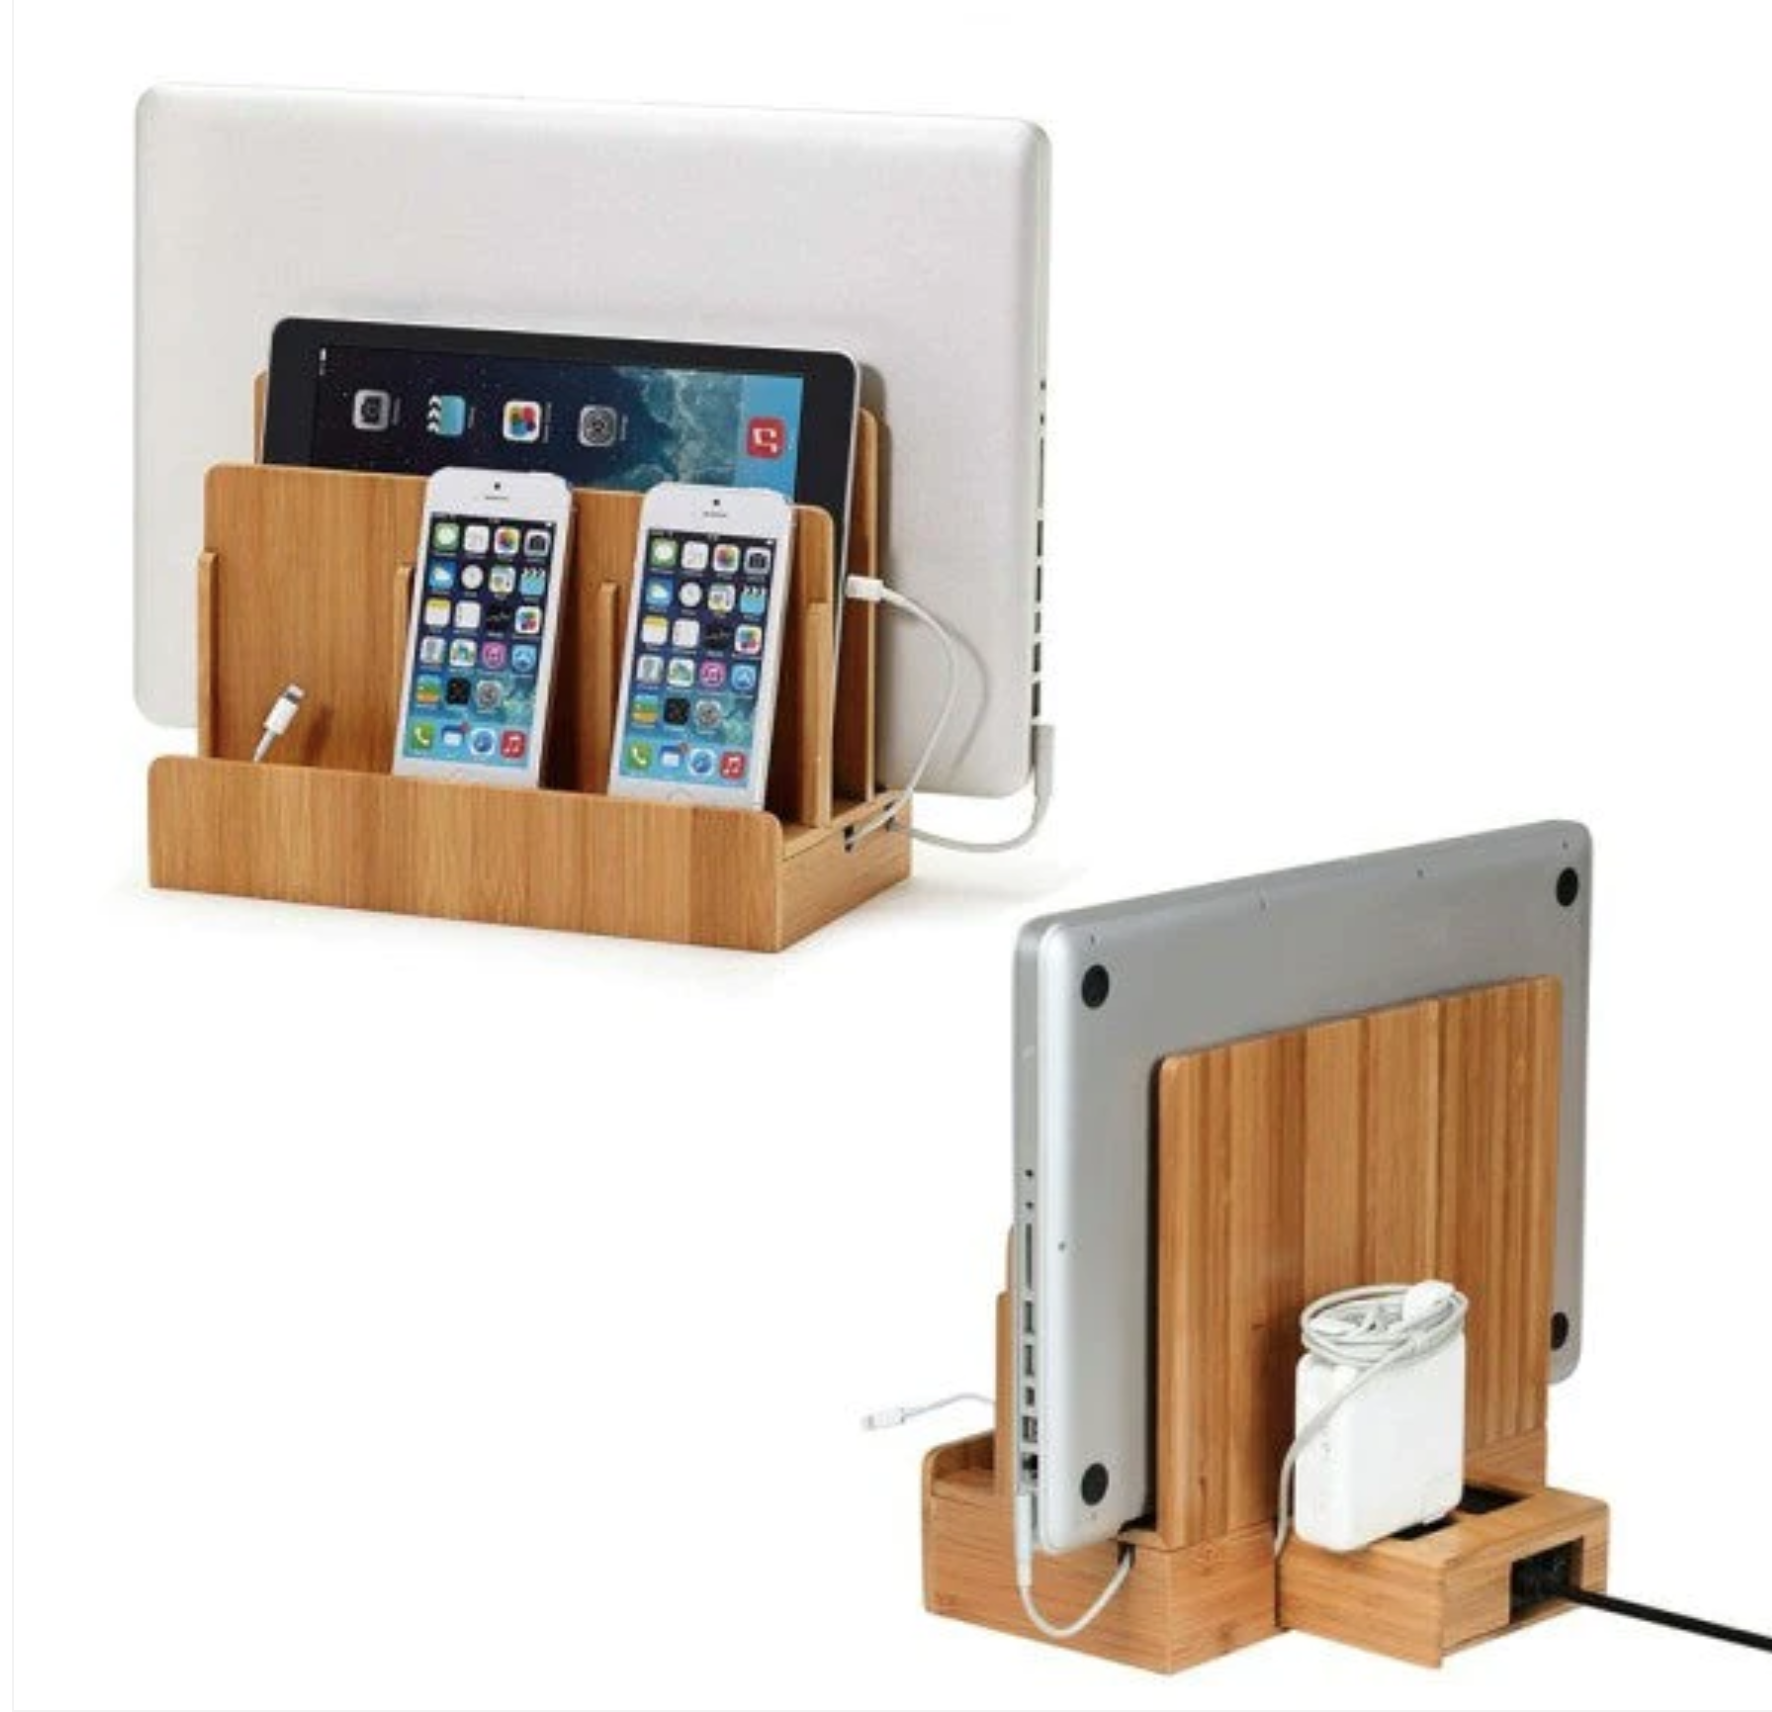 Charging station for phones, tablets and laptops